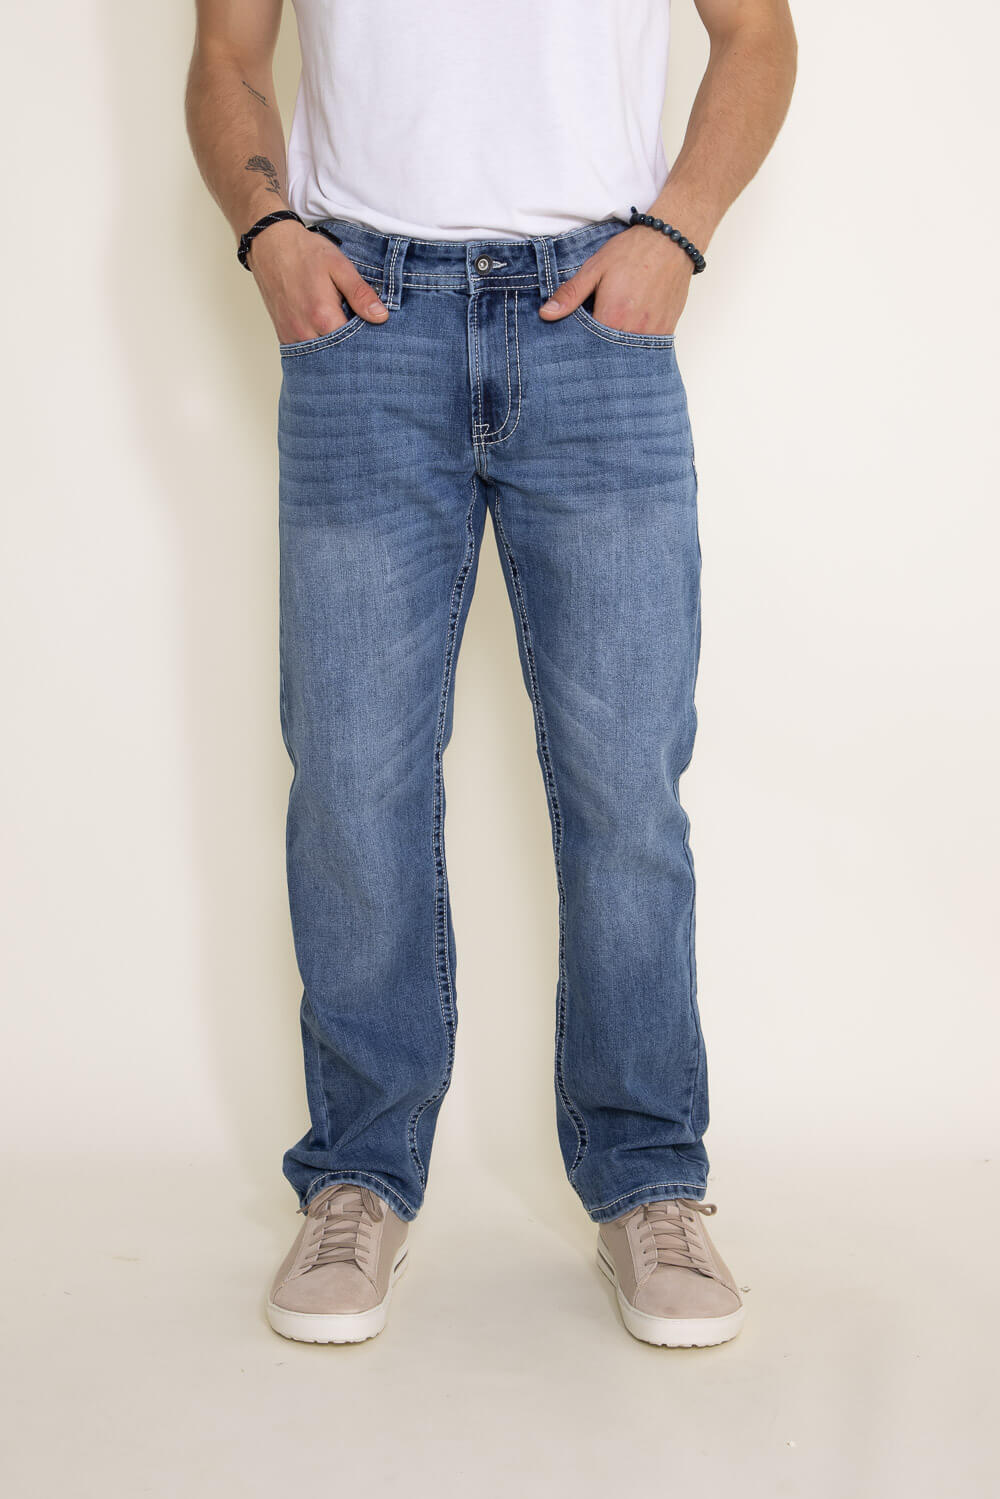 Axel Jeans Vincent Classic Straight Jeans for Men | AXMB0066-VINCENT ...